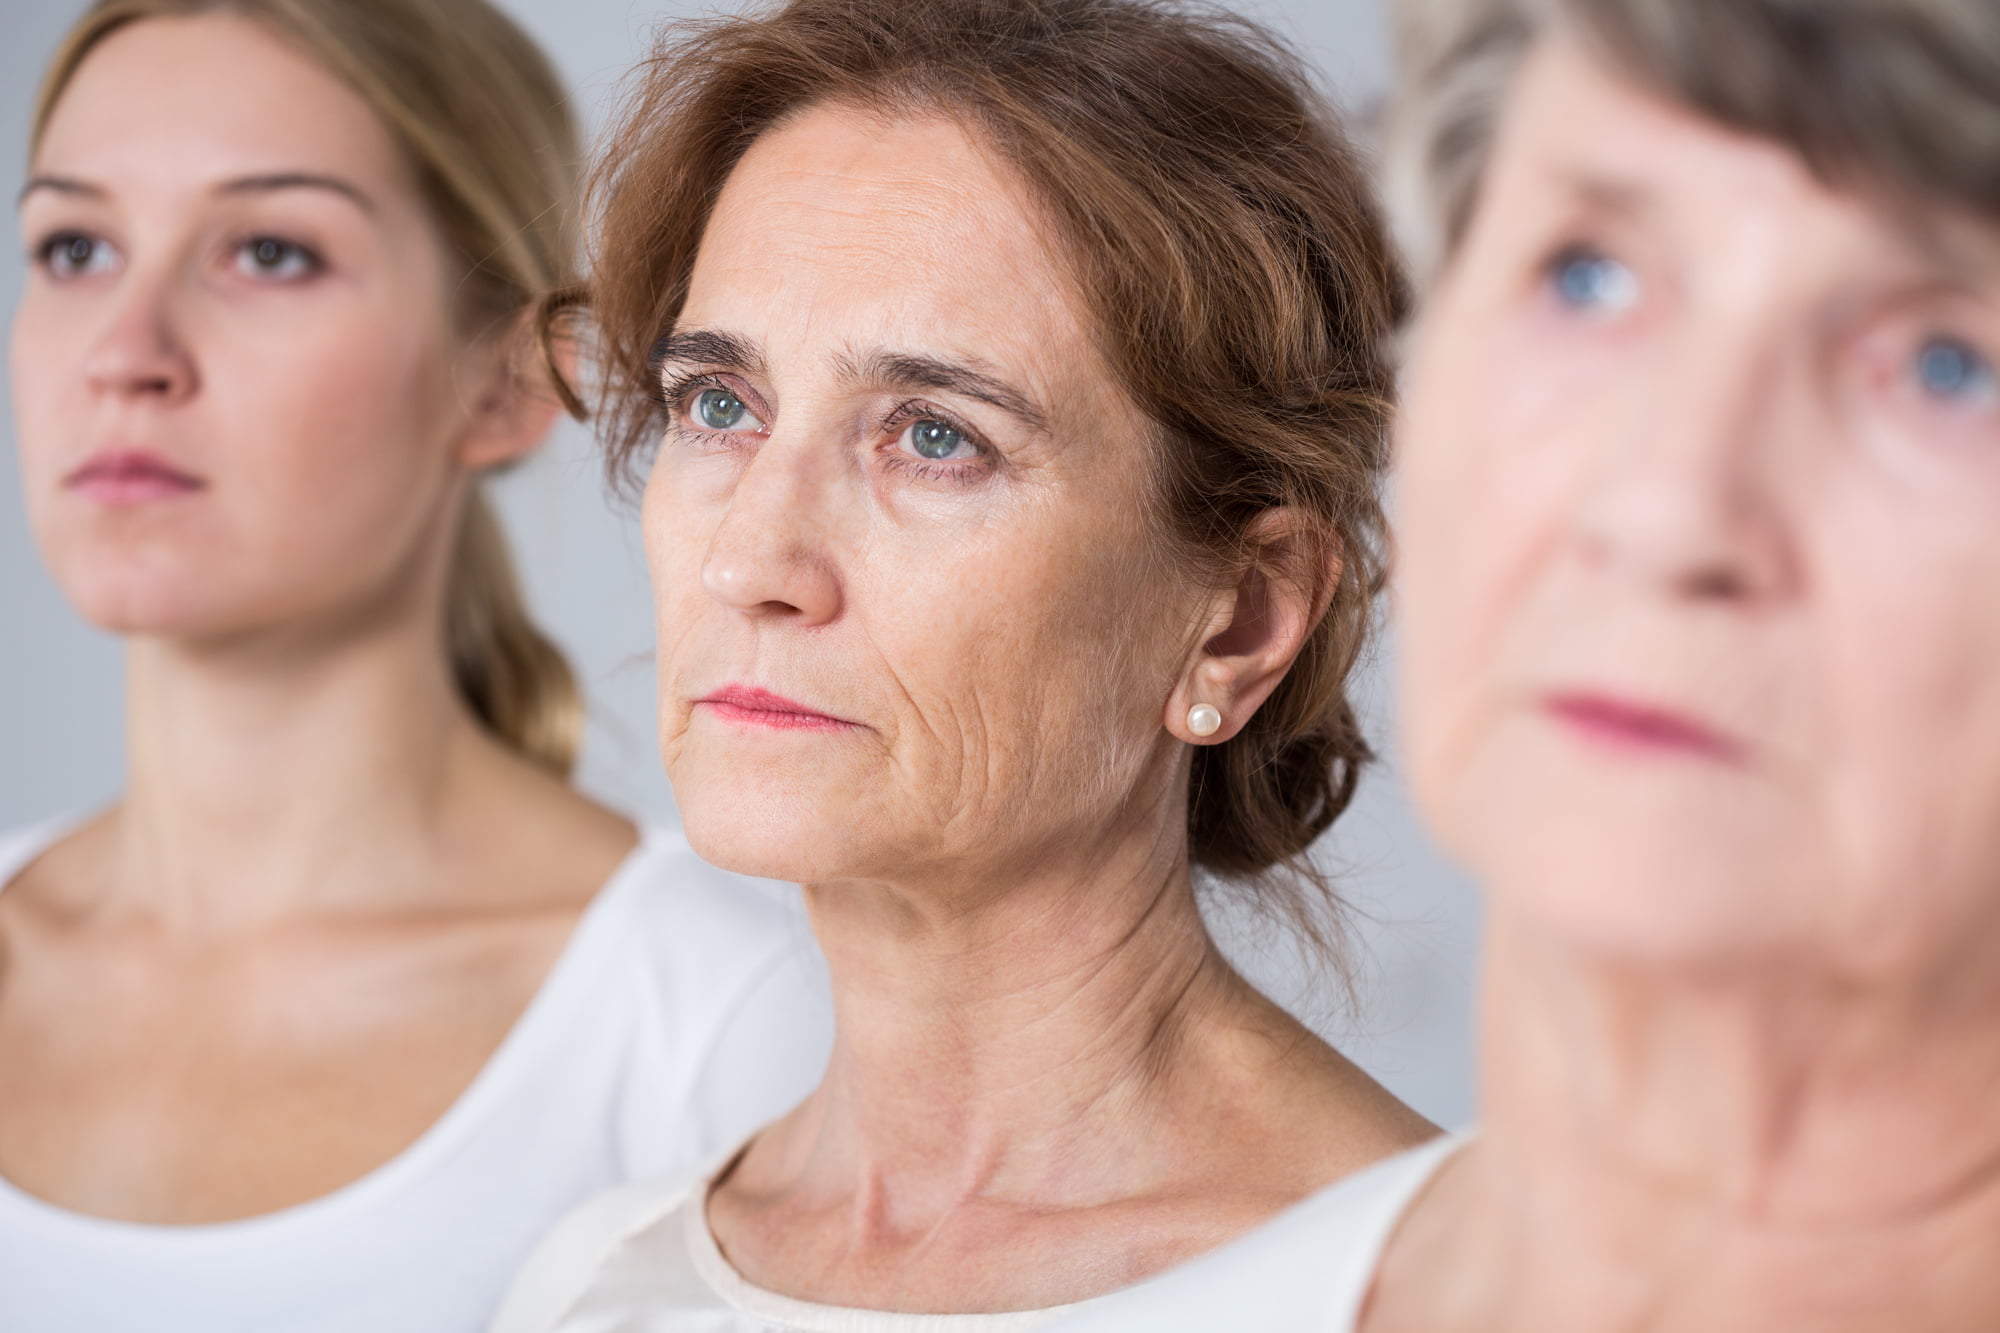 Are you gracefully aging and want to know what to expect next in your journey? Here's what the aging process actually looks like in practice.